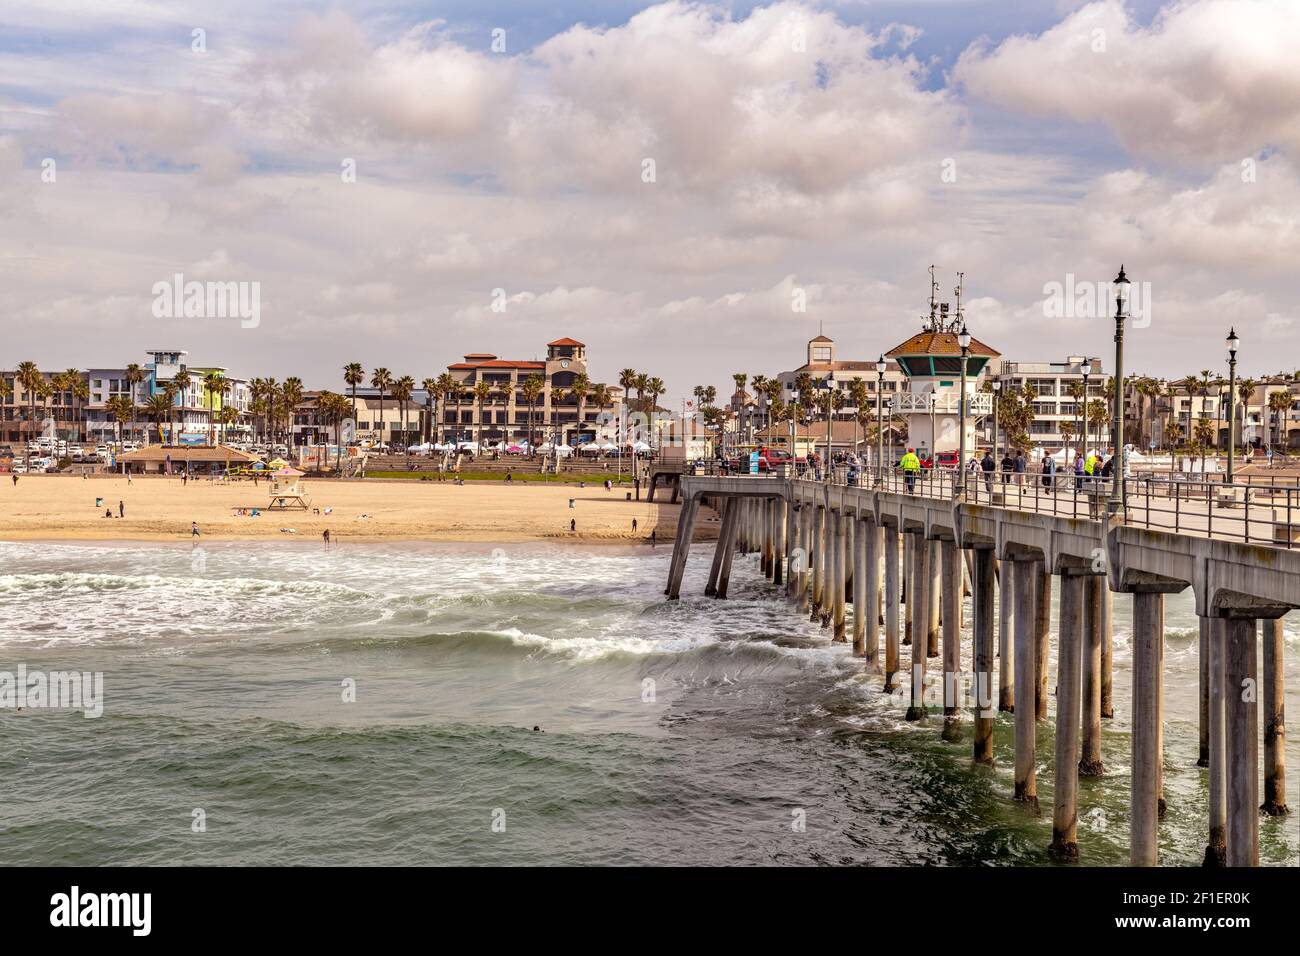 Huntington Beach pier and shoreline show why this area is a popular tourist attraction, with its vibrant skies and bustling commerce. Stock Photo